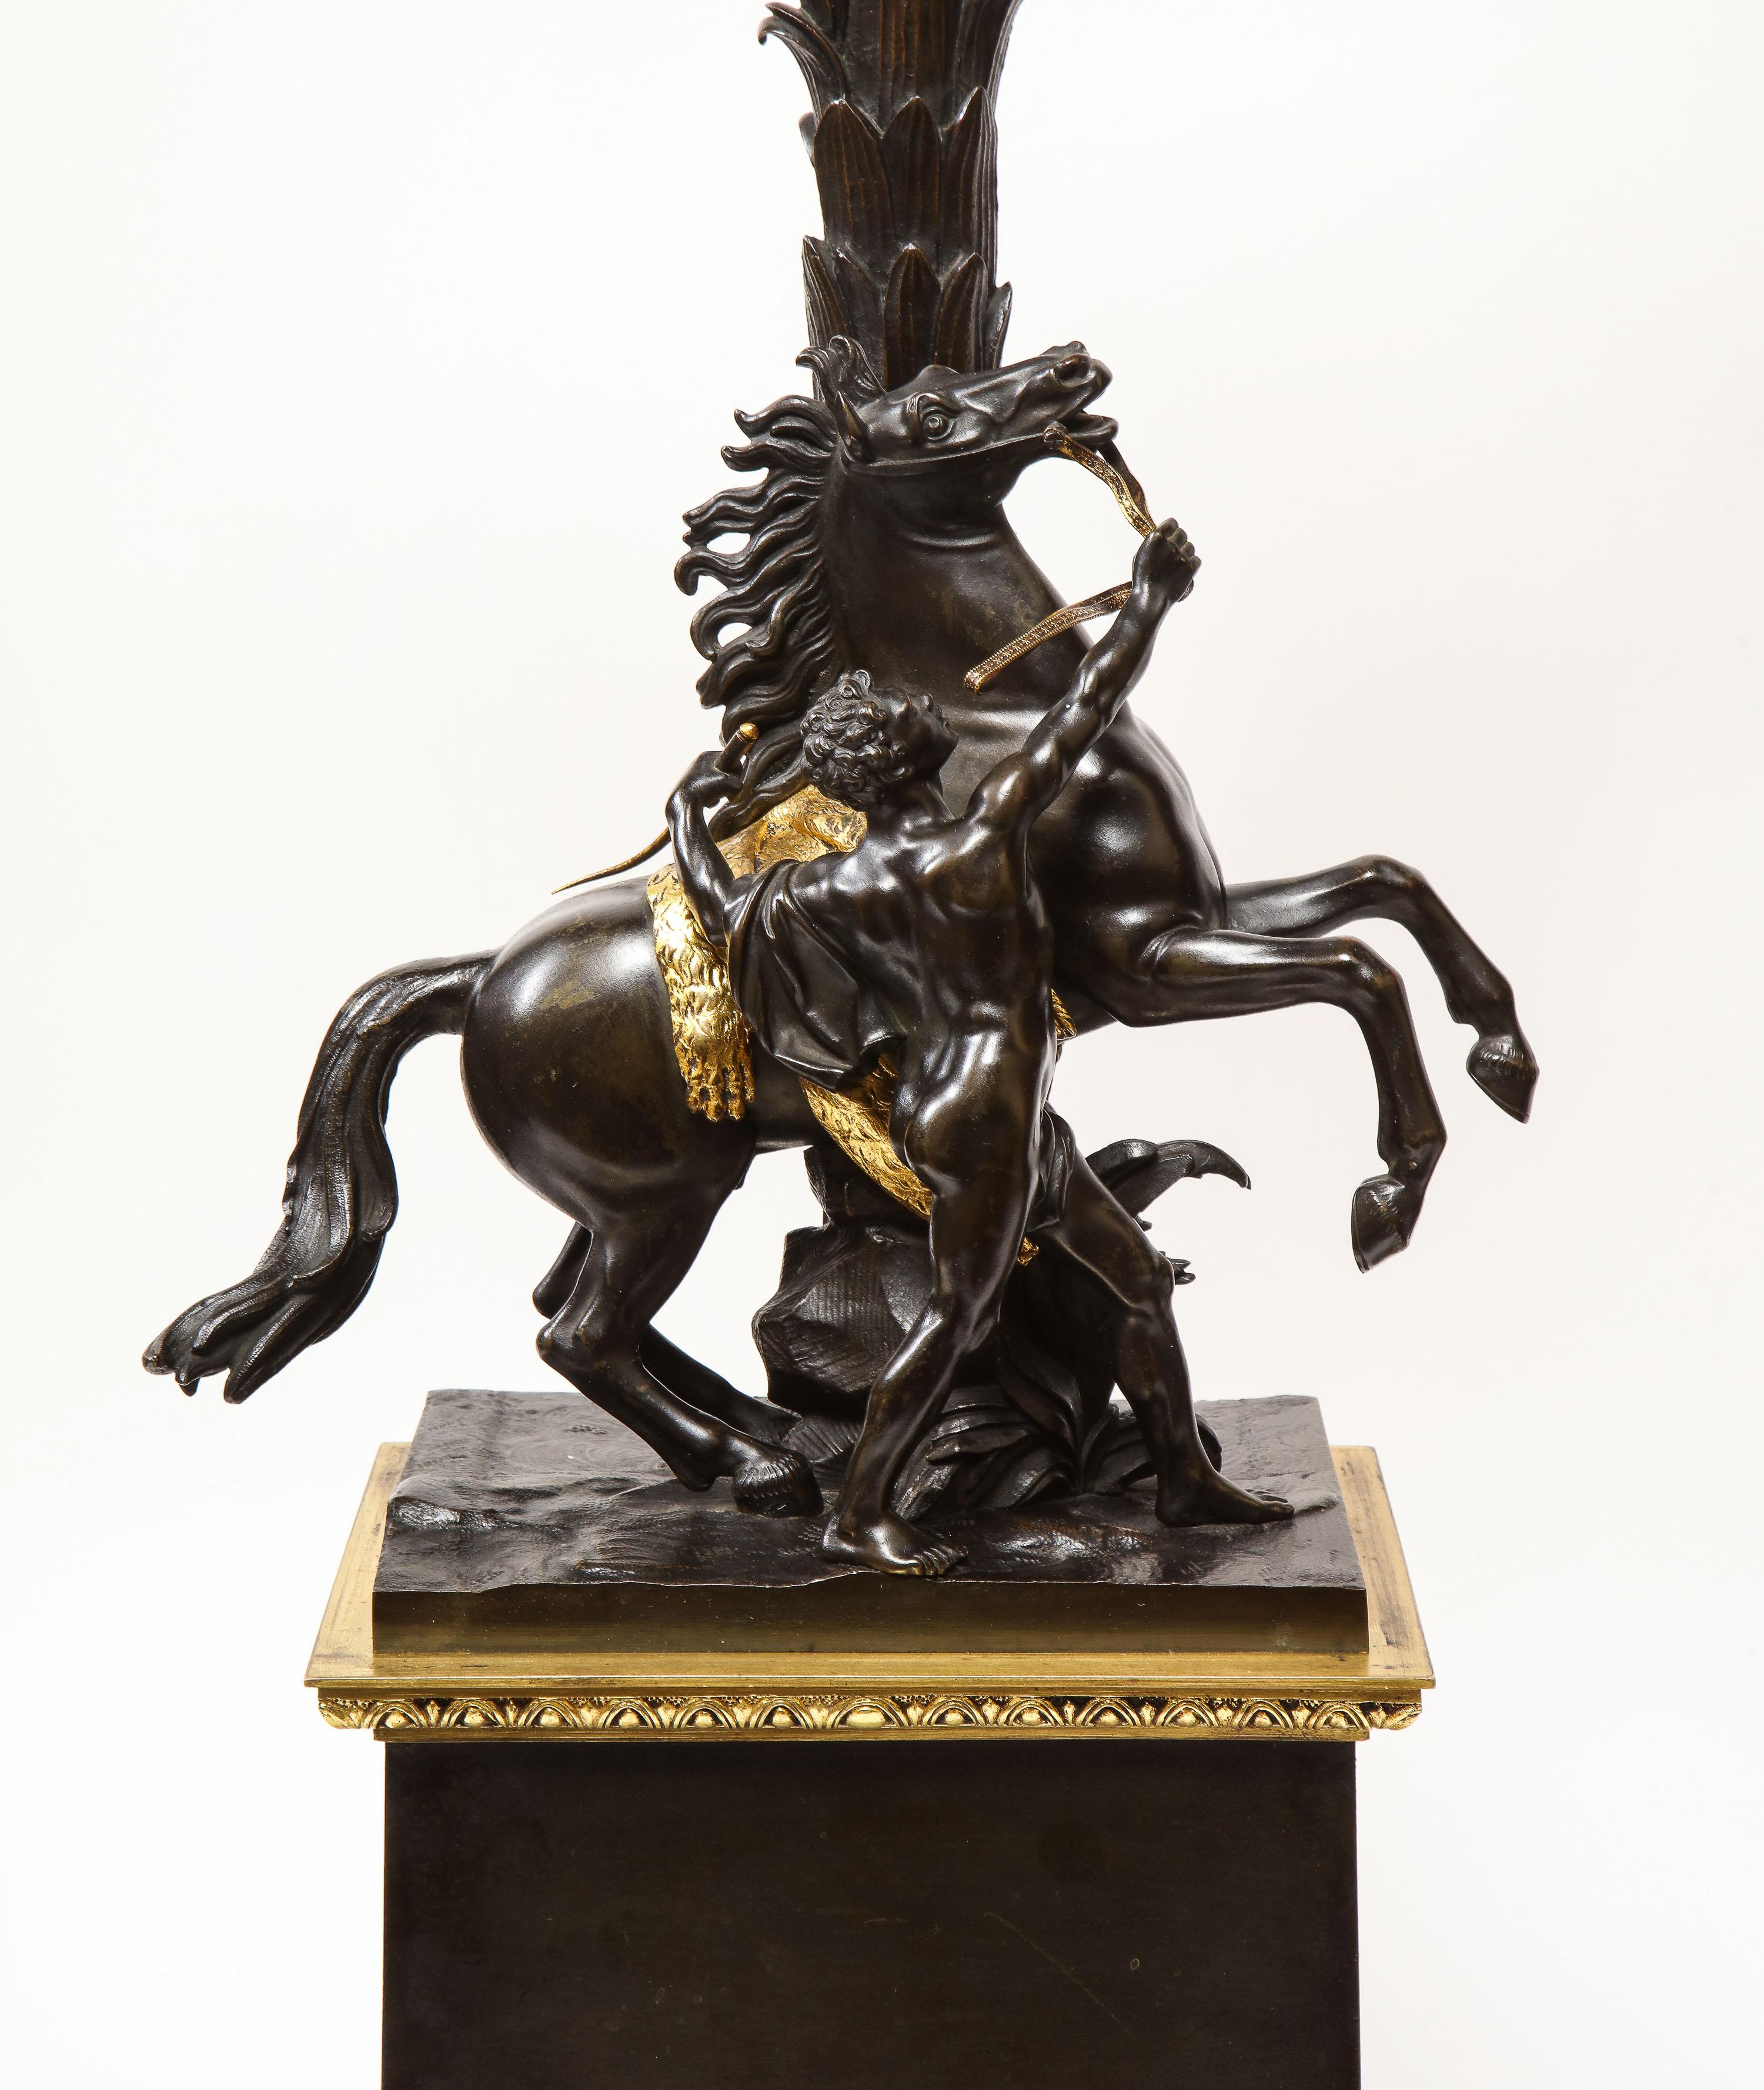 19th Century Large Pair of French Restauration Ormolu and Patinated Bronze Candelabra, Horses